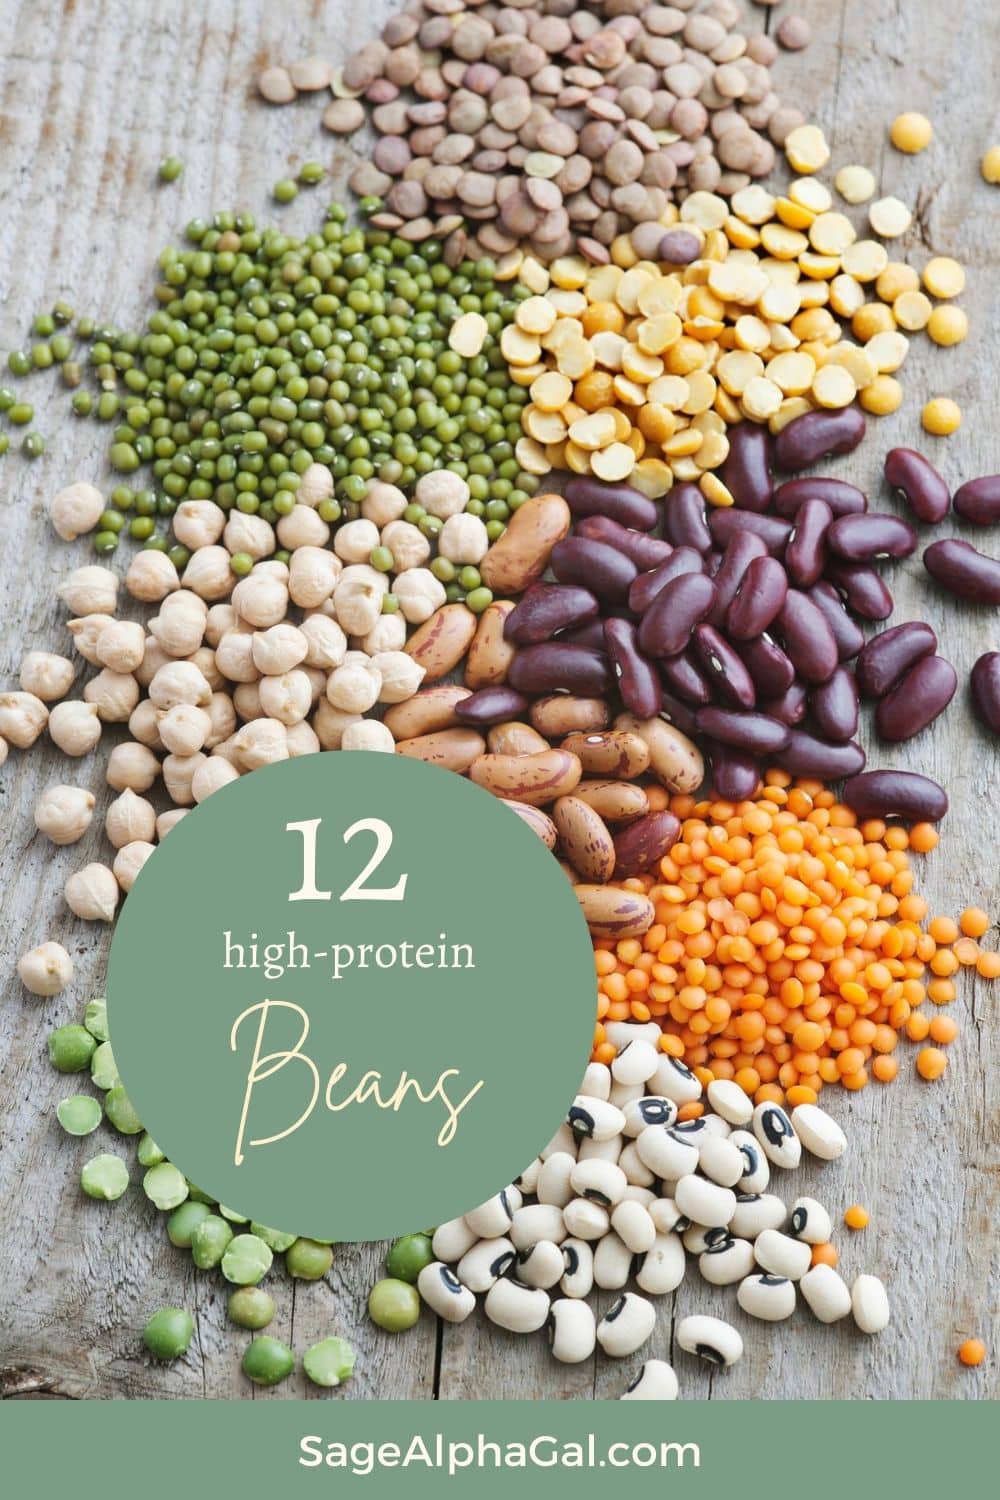 Best Beans For Protein Pin 2 JPG 